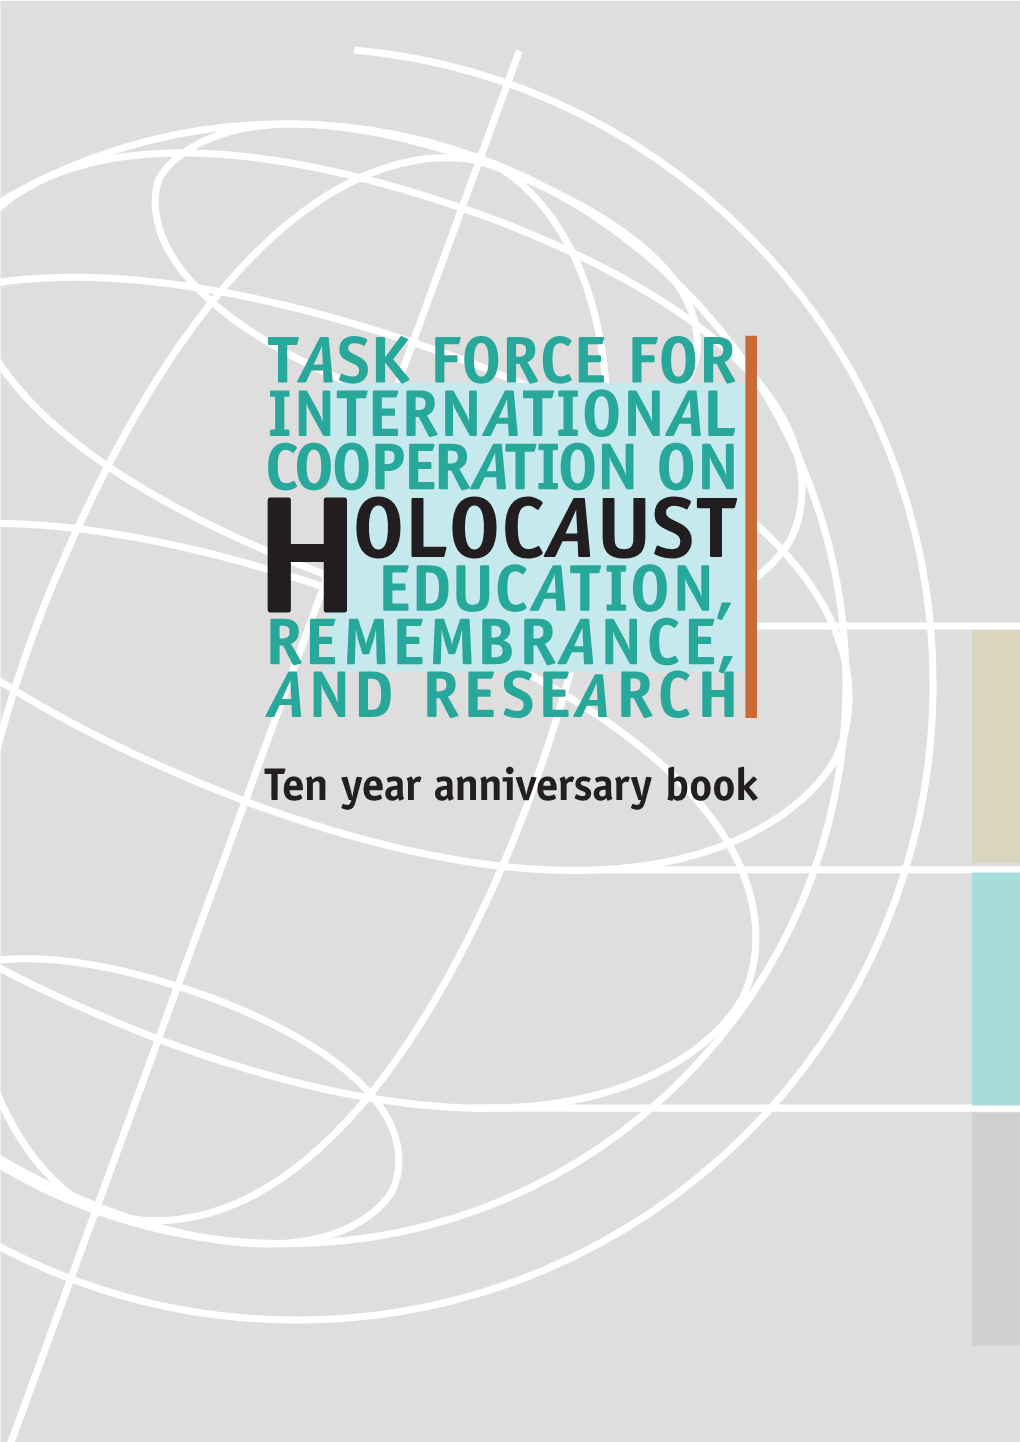 Ten Year Anniversary Book Anniversary Year – Ten Research and Remembrance Education, Holocaust on Cooperation International for Force Task The